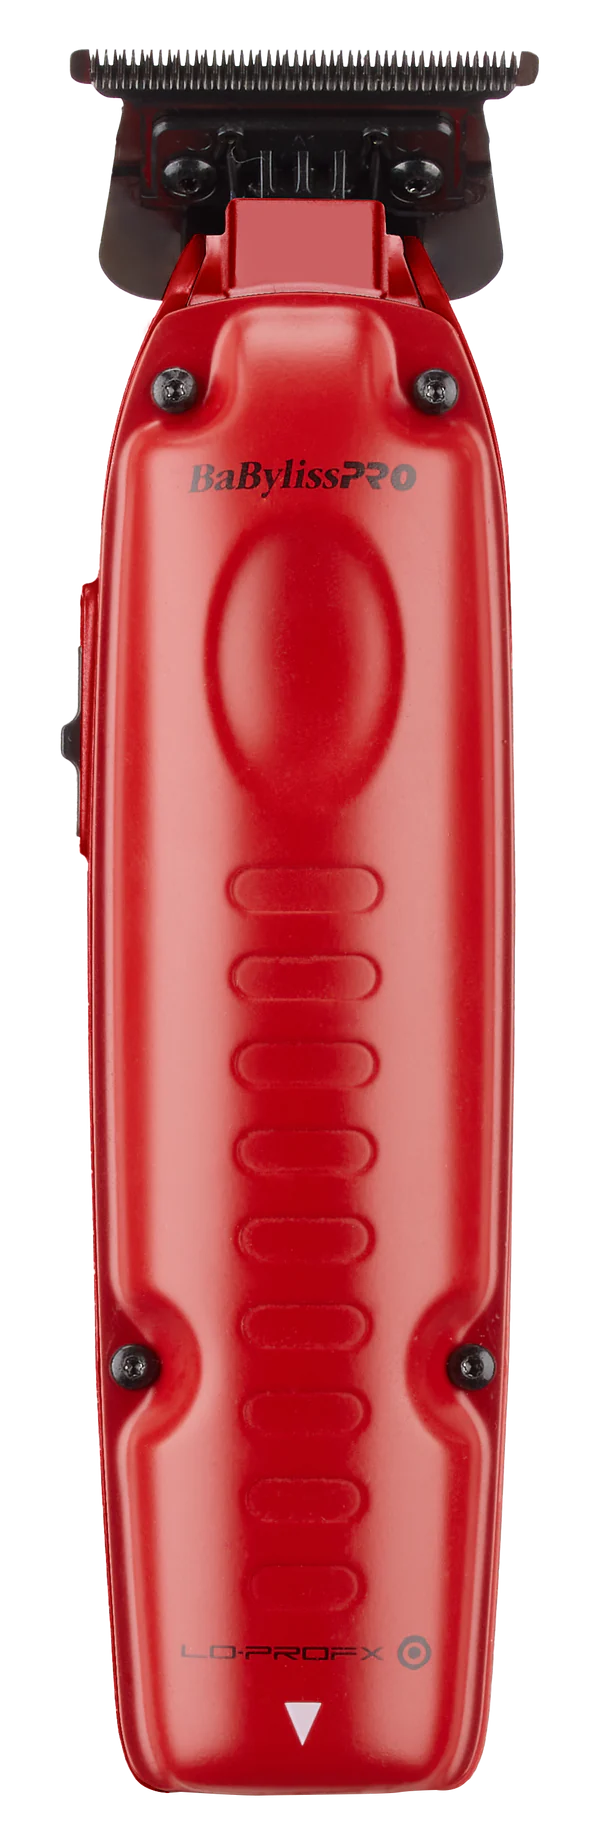 BaBylissPRO FXONE Lo-ProFX Matte Red High Performance Low Profile Trimmer w Interchangeable Lithium Battery Pack - FX729MR